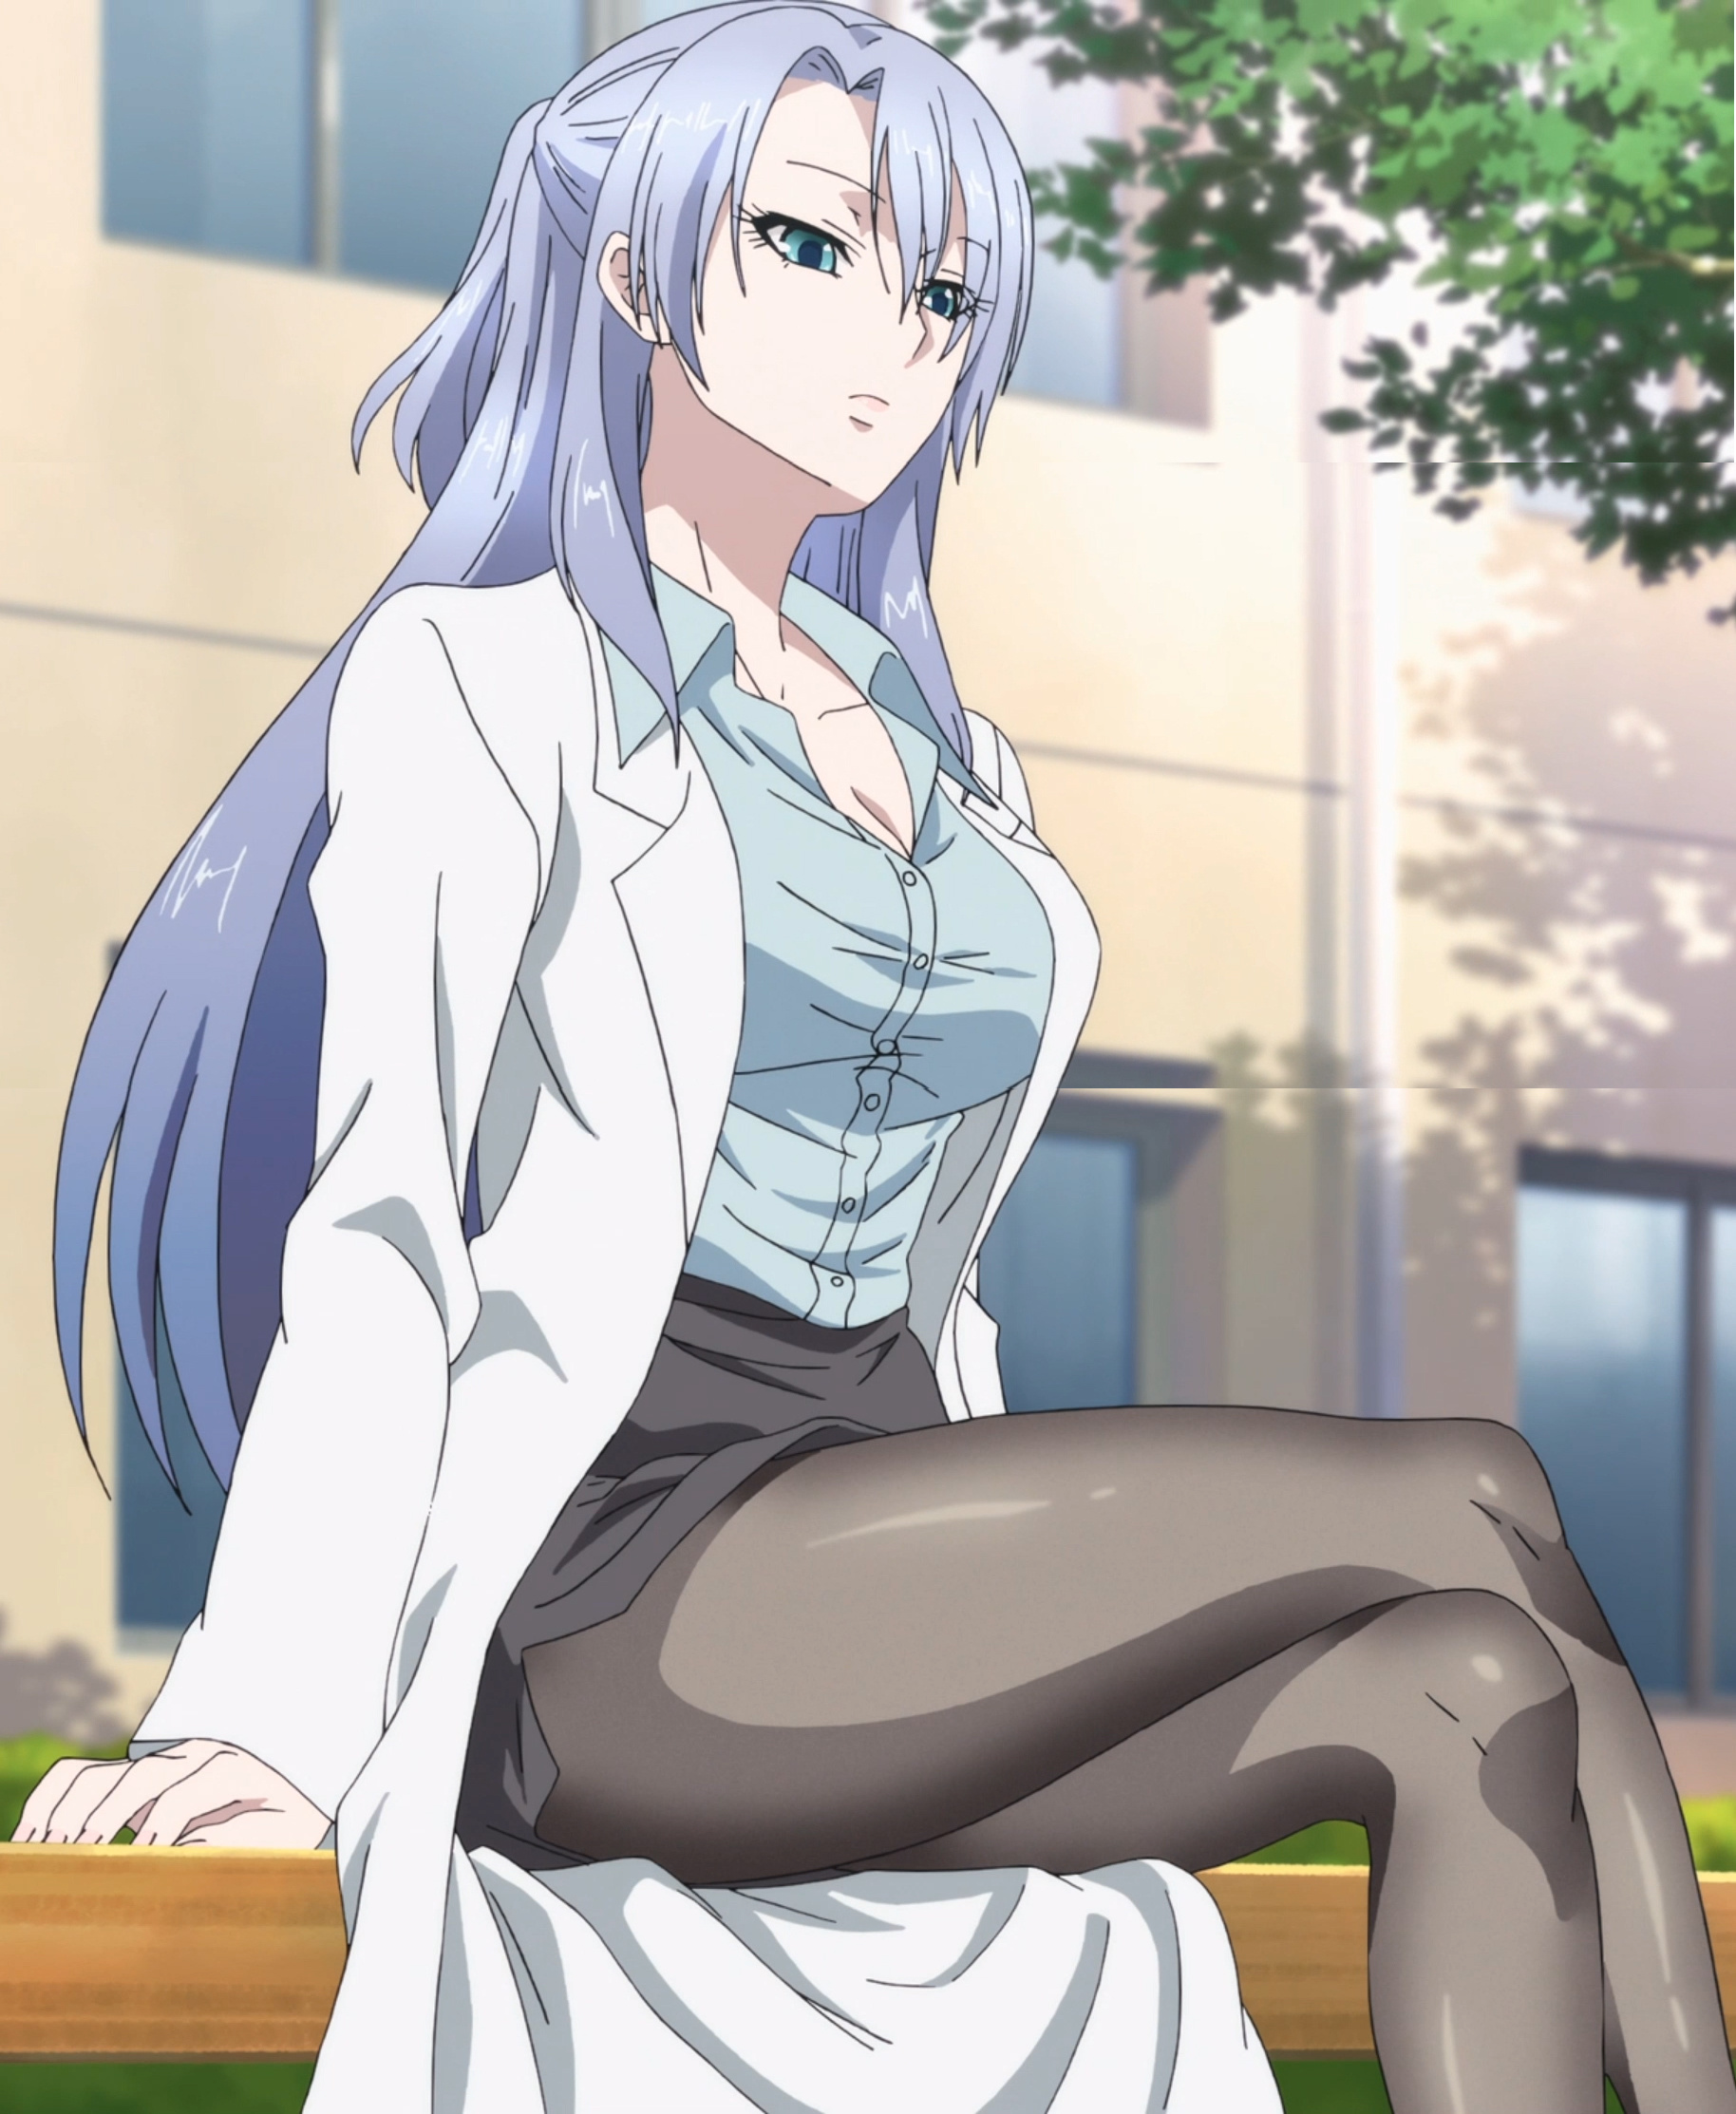 Science Fell in Love, Rikei ga Koi, Episode 1 discussion, 1830x2230 HD Handy